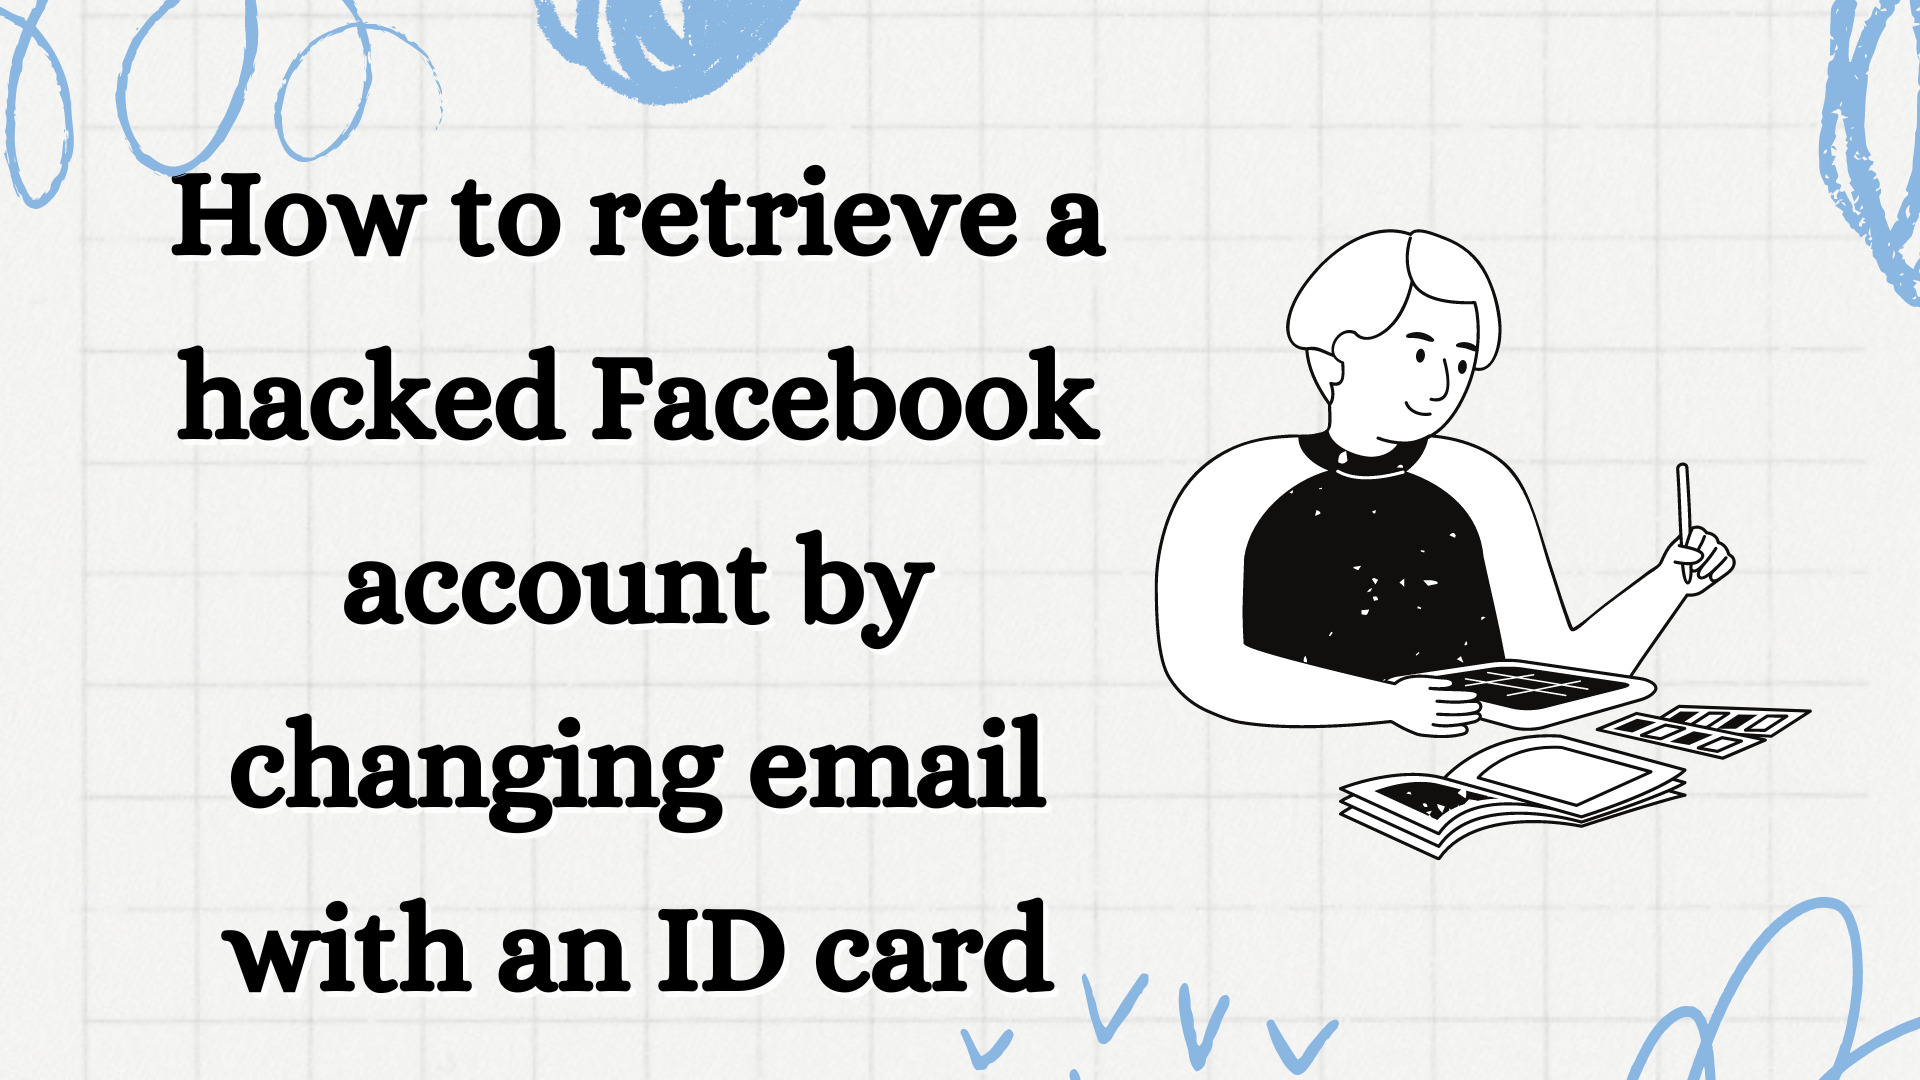 How to retrieve a hacked Facebook account by changing email with an ID card